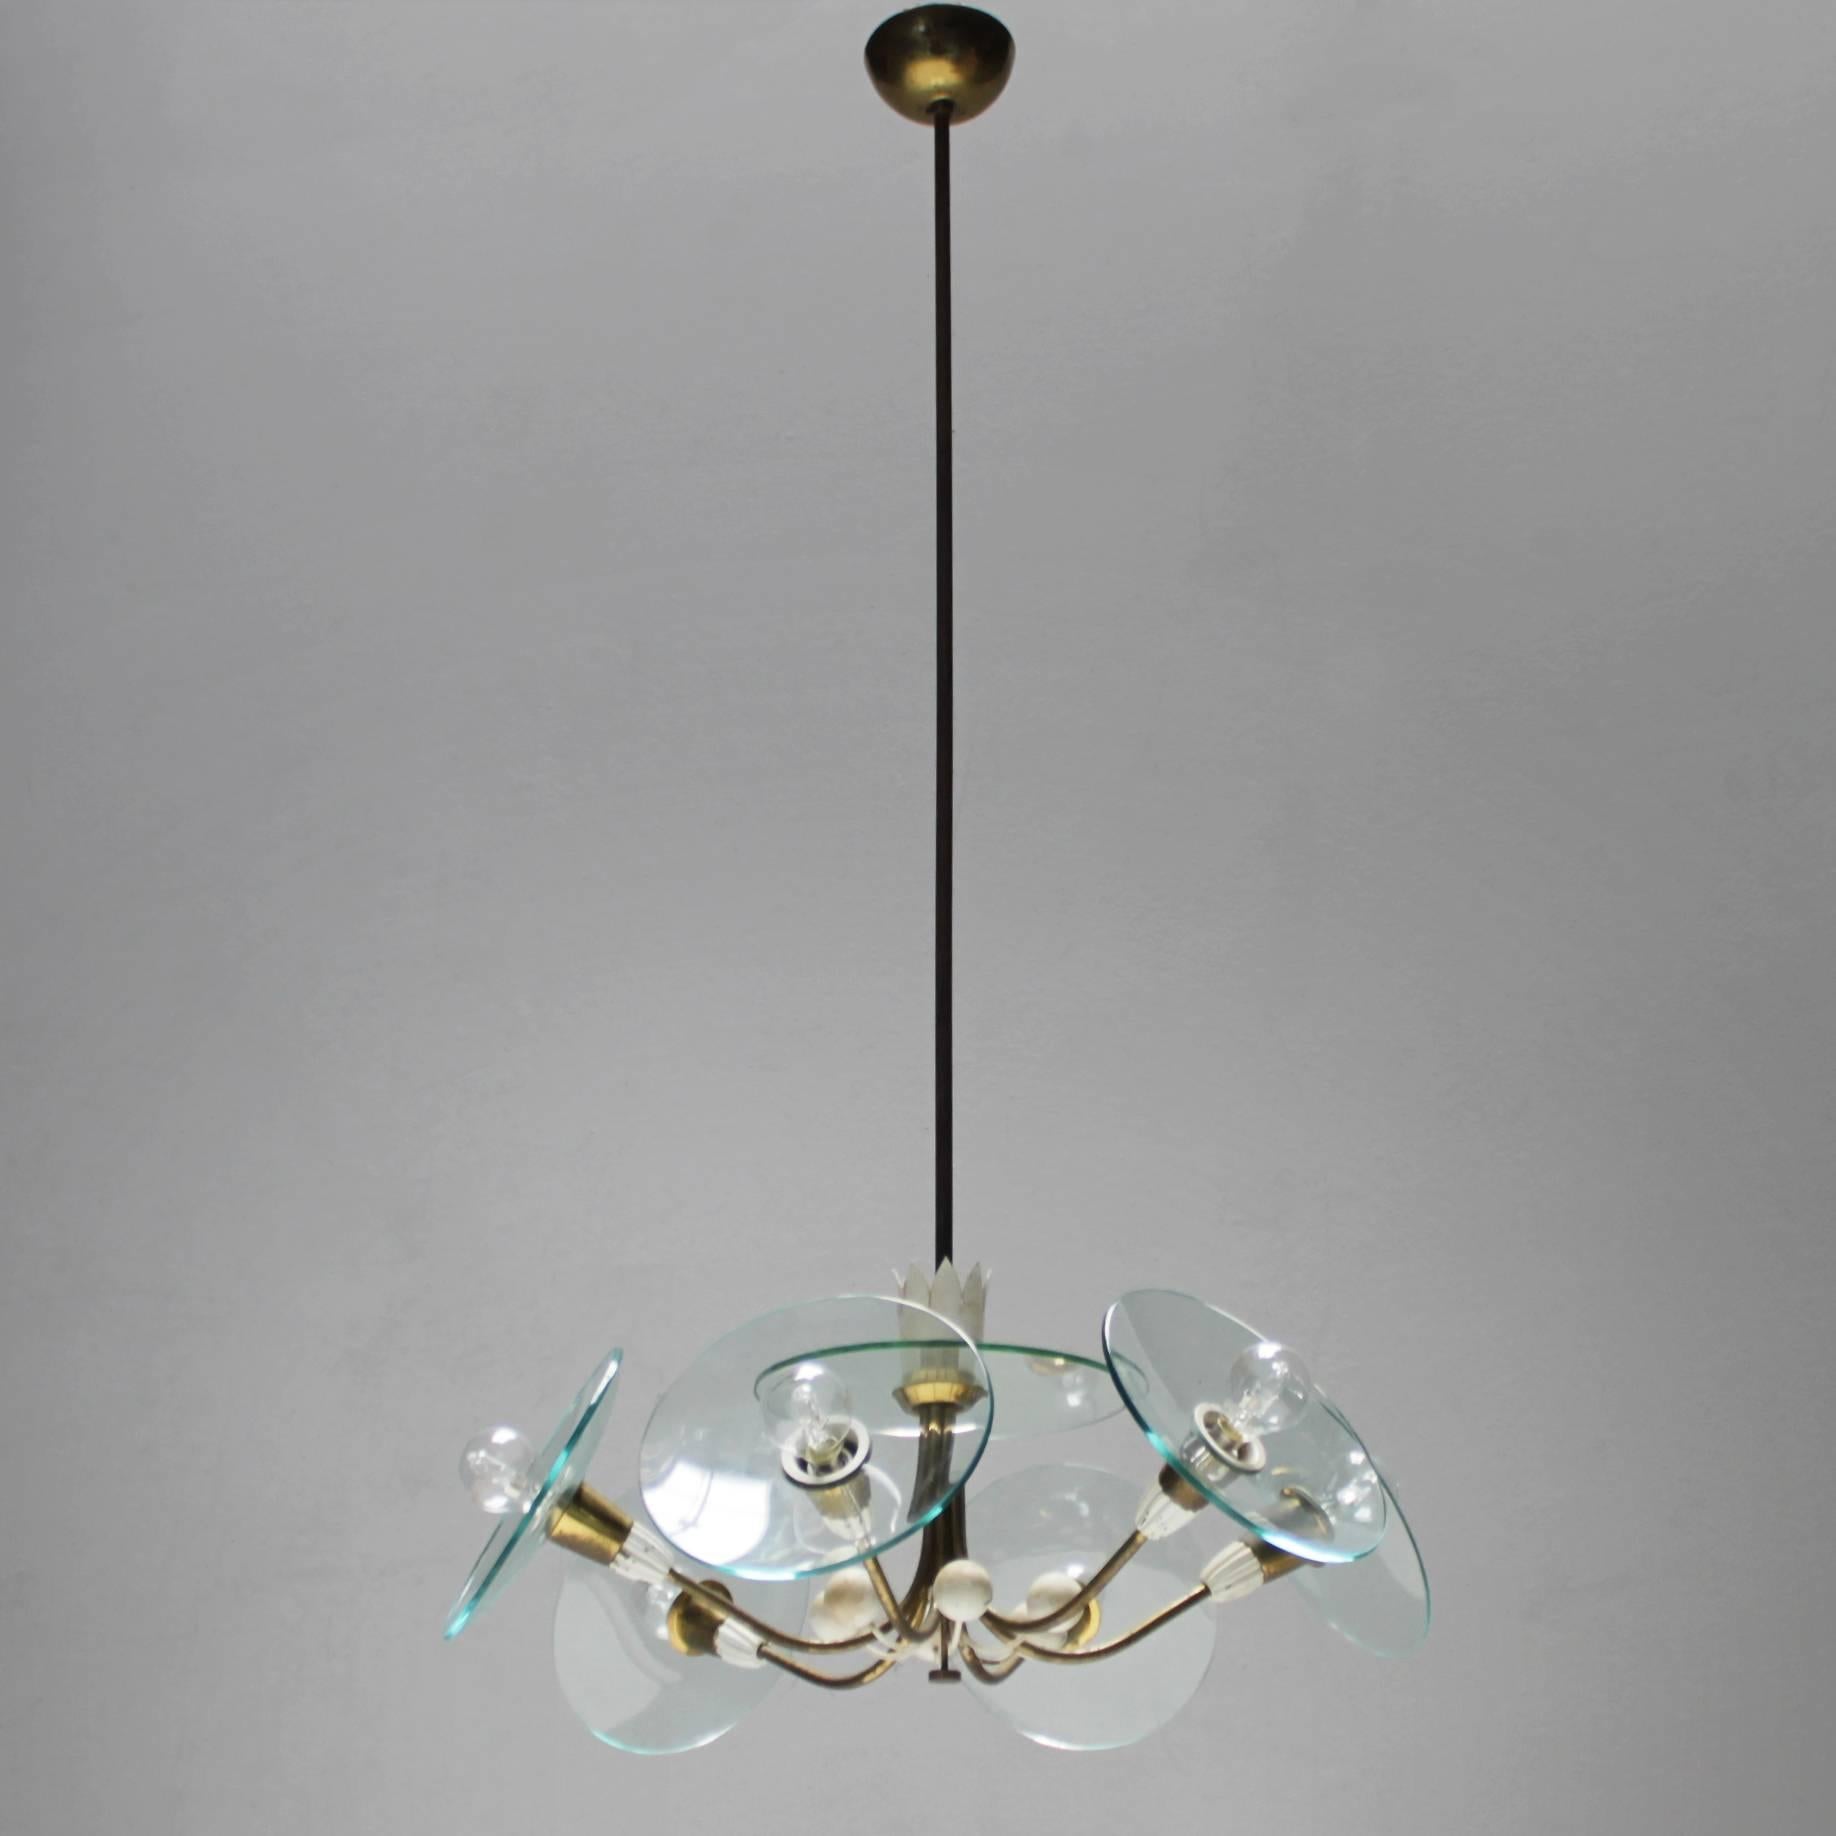 Chandelier in the style of Pietro Chiesa for Fontana Arte Italy. Rewired but in a beautiful original condition.
Measurements: height from ceiling till drop: 41.7 in. (106 cm), diameter: 22.0 in.(56 cm). Diameter glass 8.2 in. (21 cm), length rod: